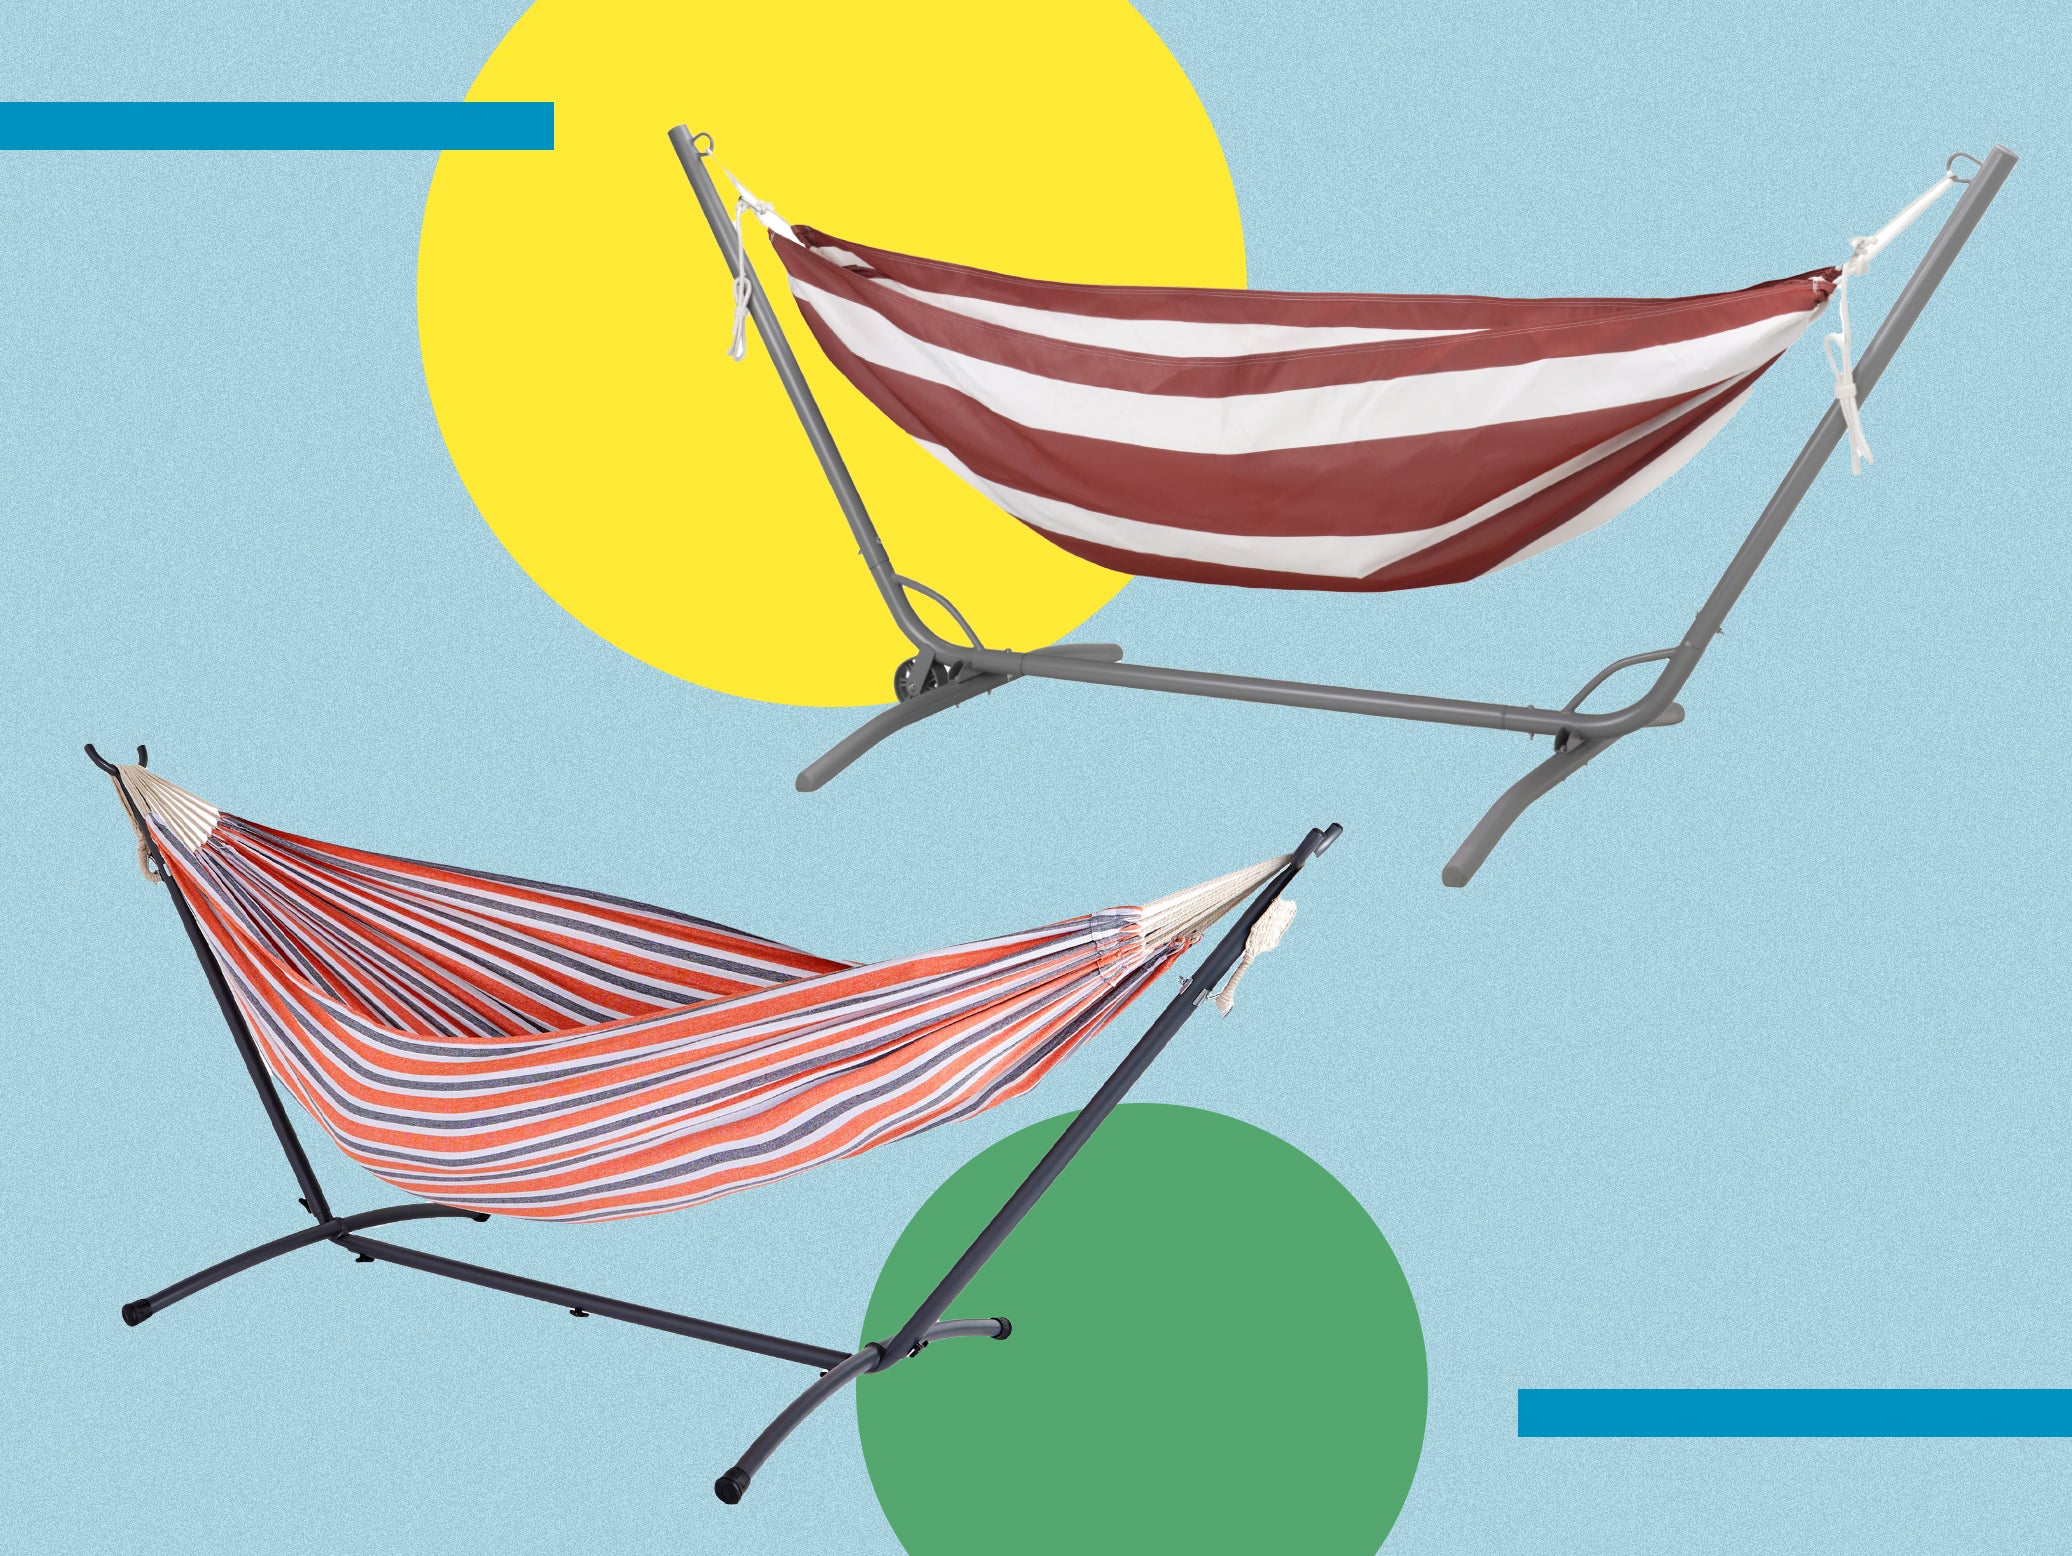 Whether hanging between trees or on its own stand, a hammock is the ideal garden addition